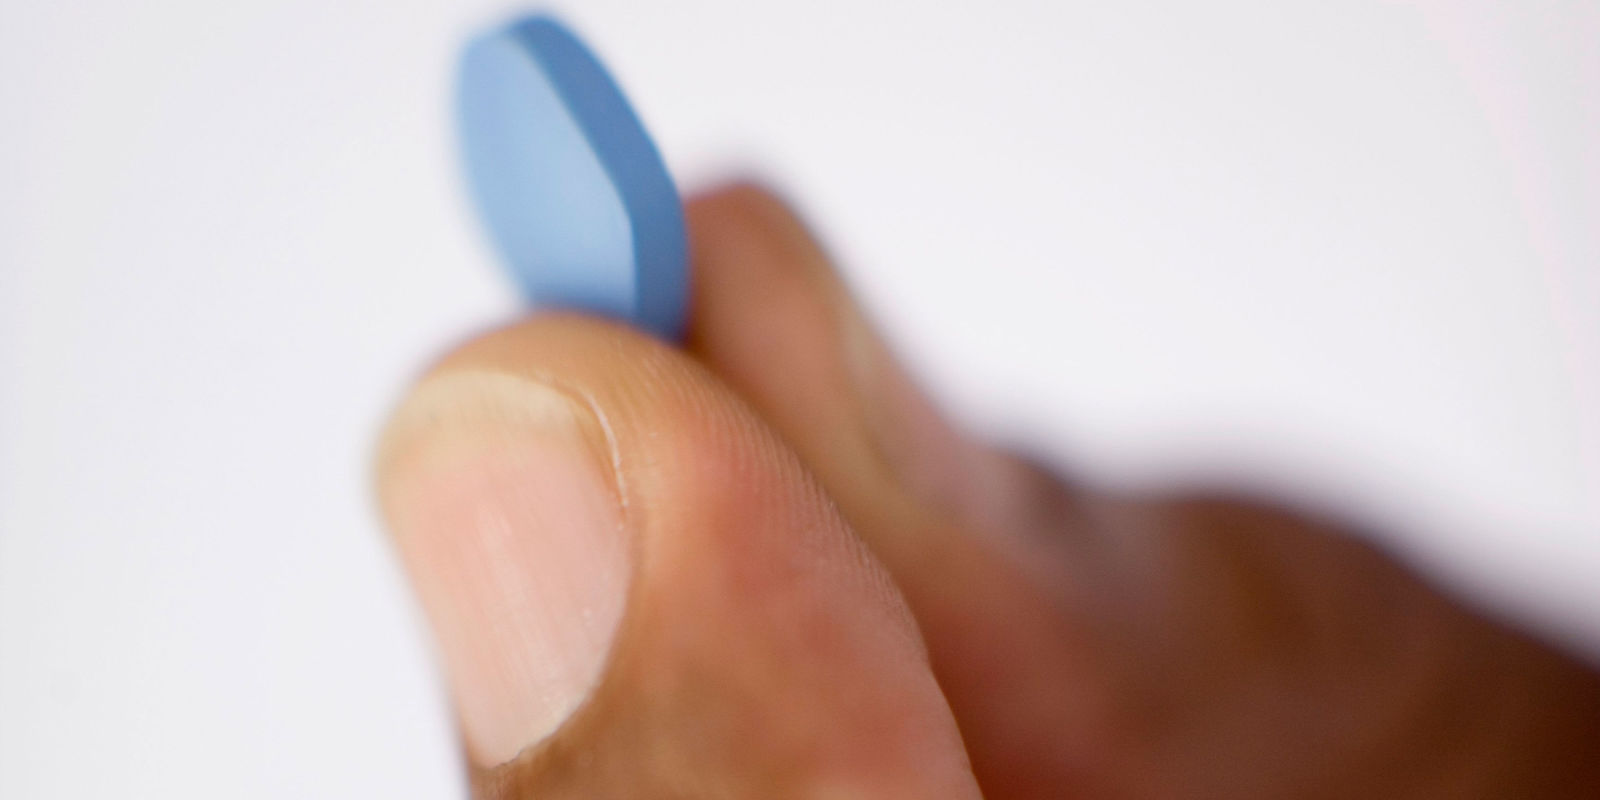 The success of the cheaper Canadian Viagra